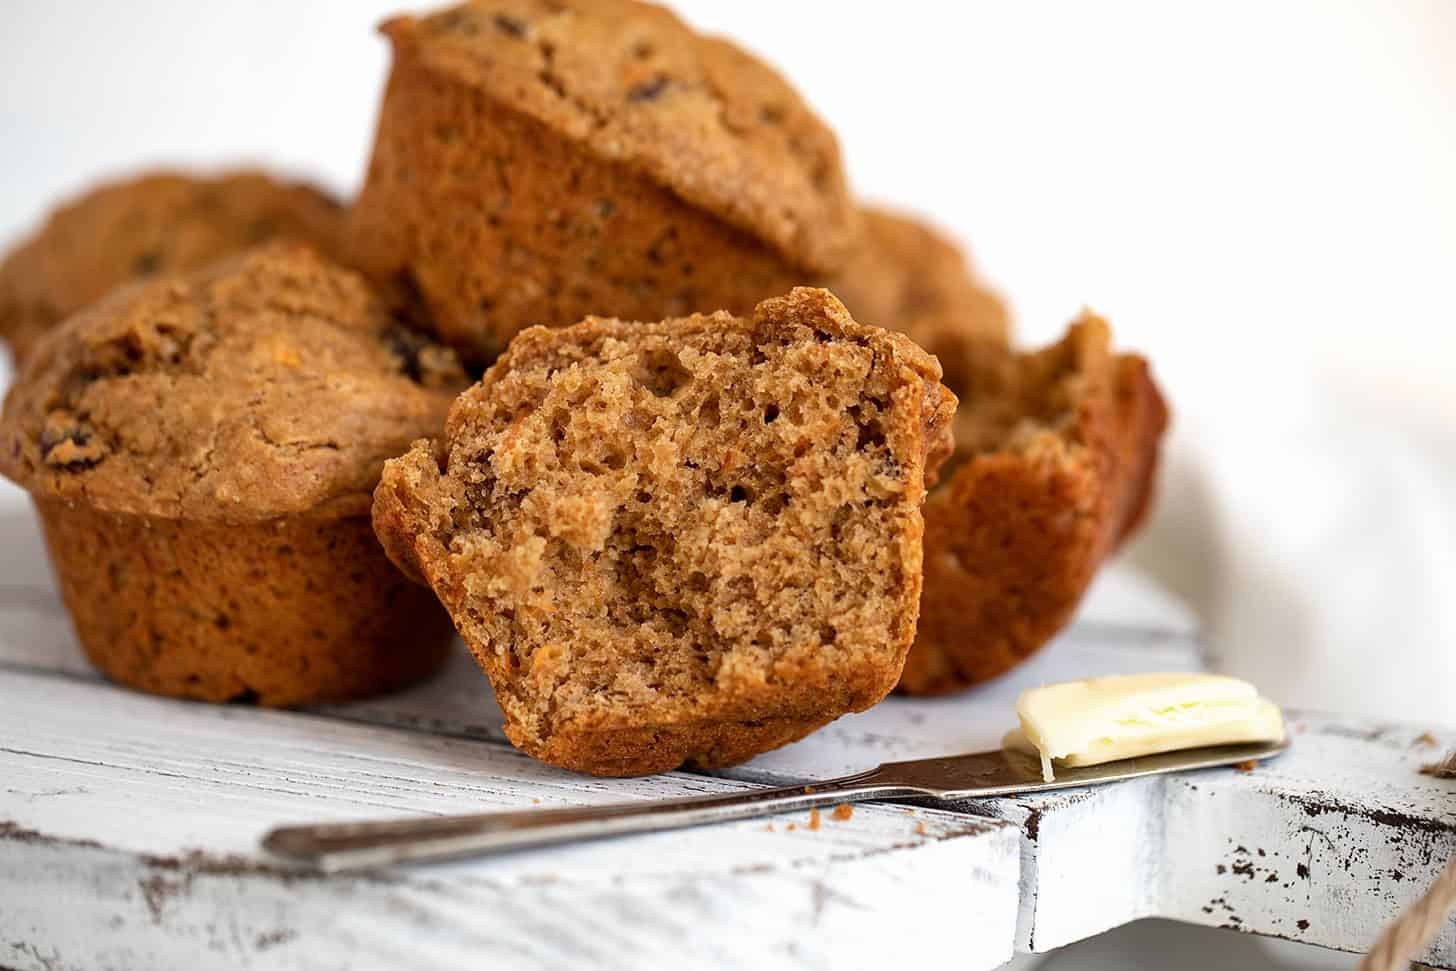 whole wheat carrot muffins on platter